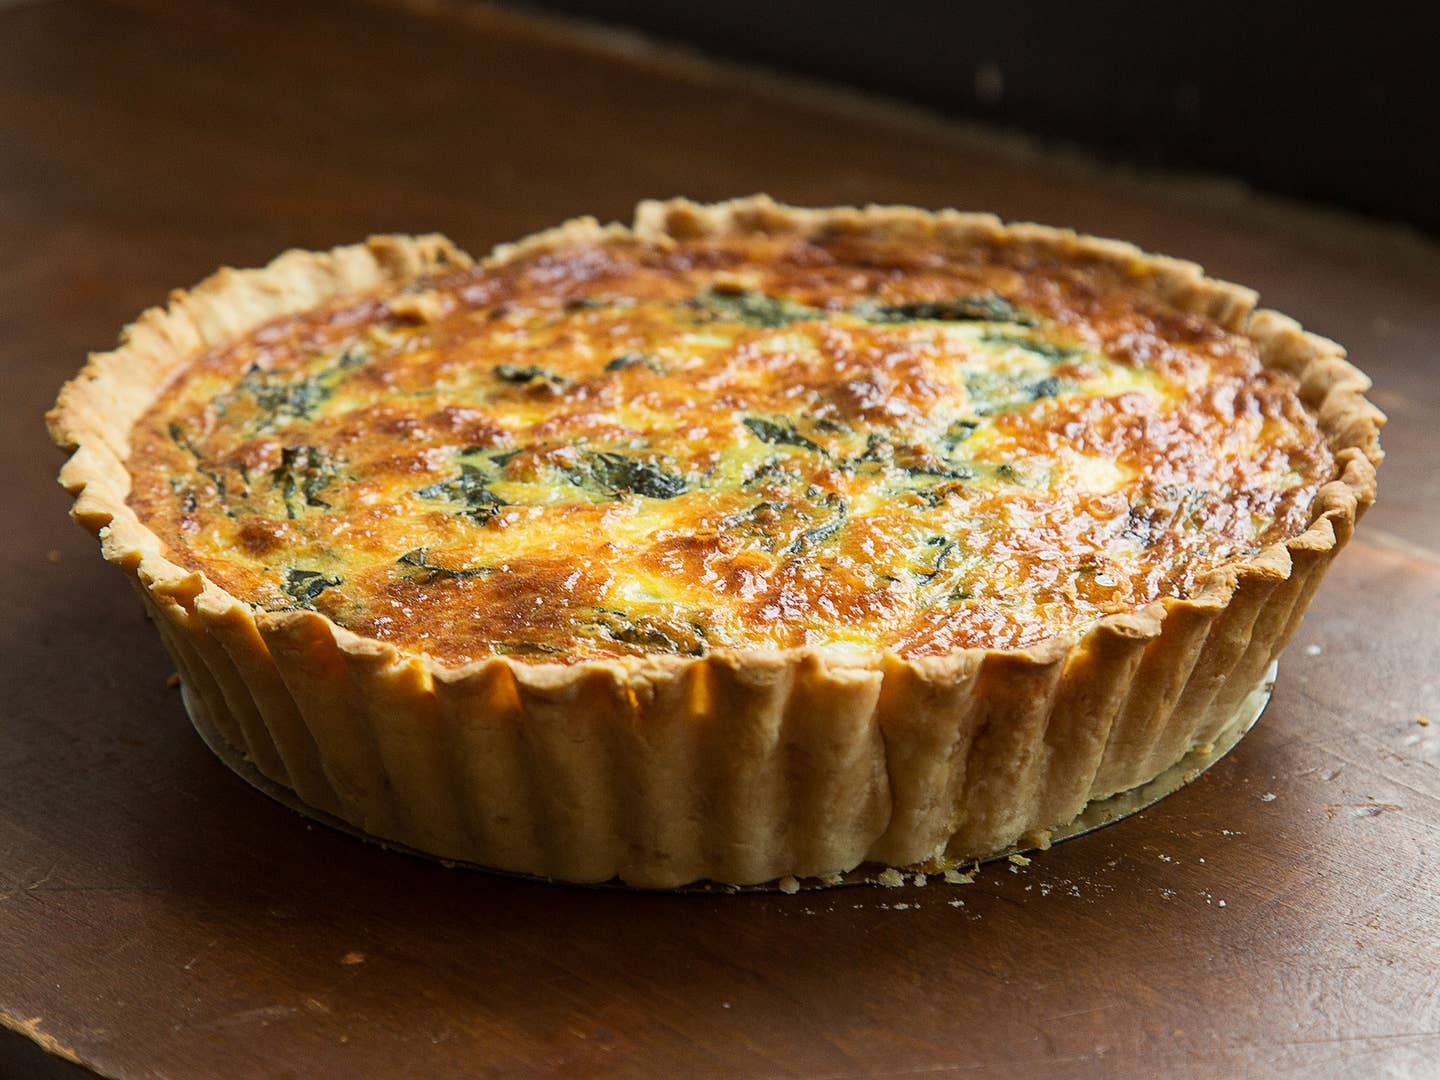 After Farmers’ Market Quiche